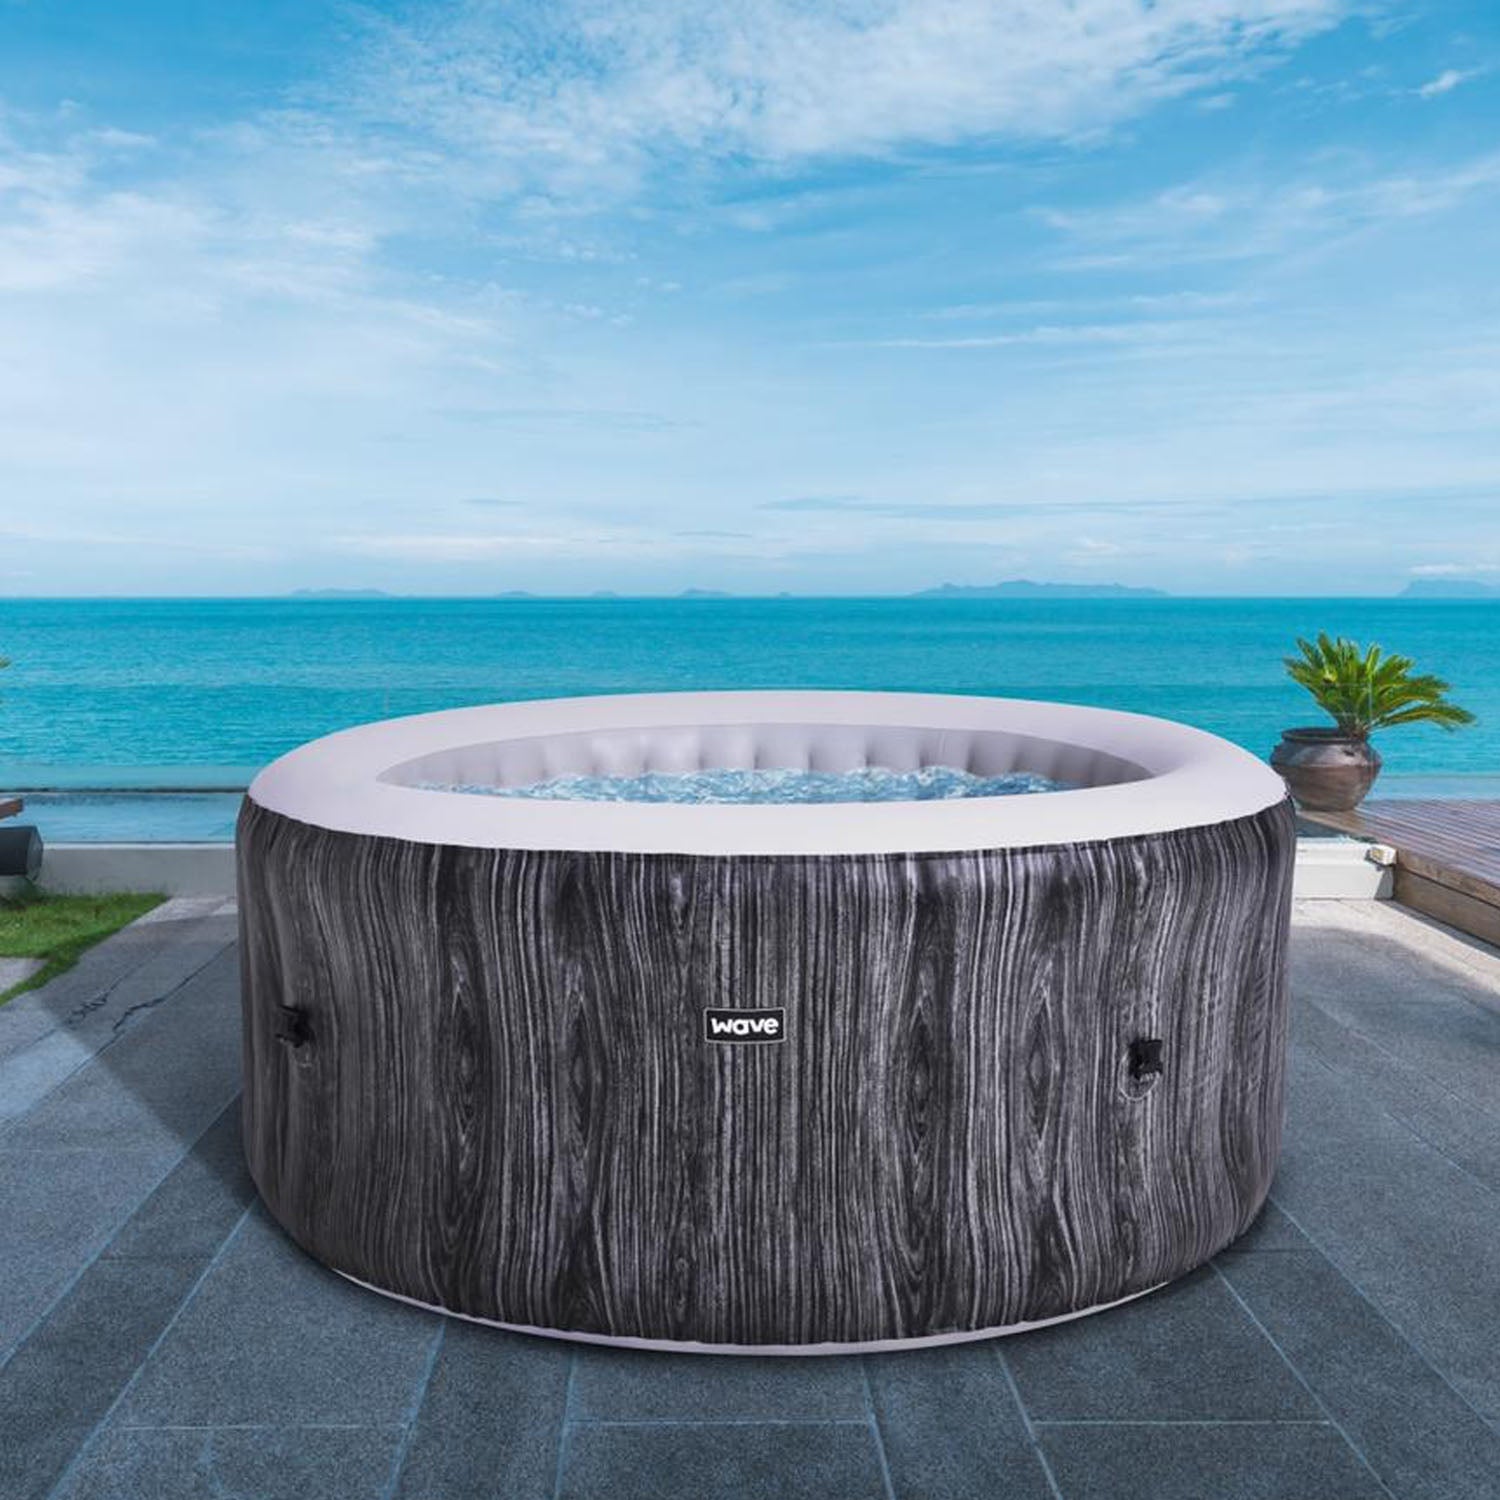 Atlantic 4 Person Inflatable Hot Tub | Grey Wood - Inflatable Spa - Wave Spas USA